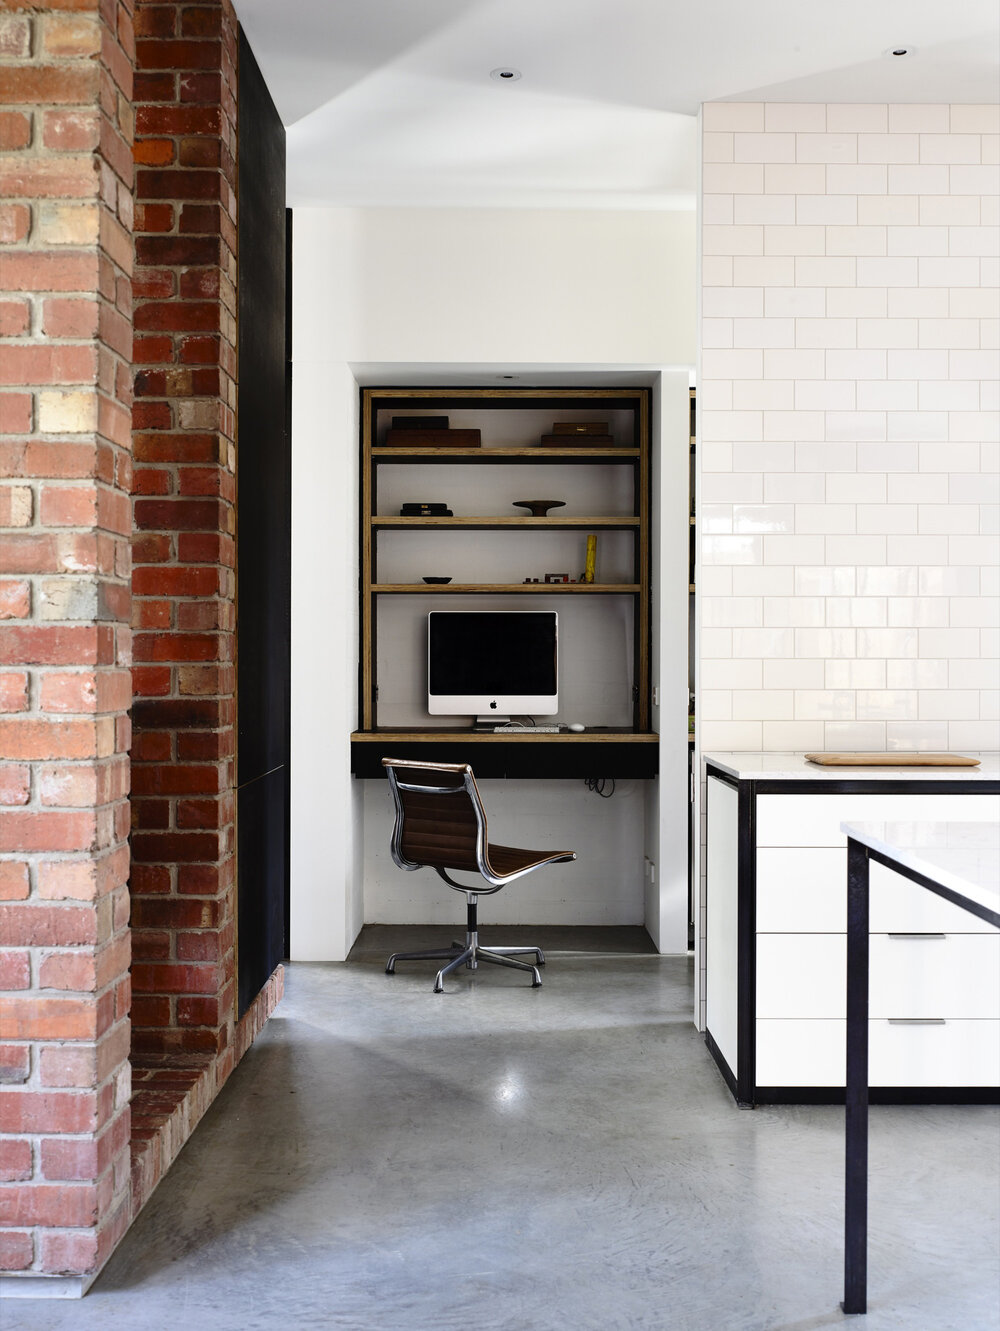 Similar to a cloffice, this micro workspace is set within a small wall opening. Designed by Wolveridge Architects. Photo by Derek Swalwell. Via  Arch Daily